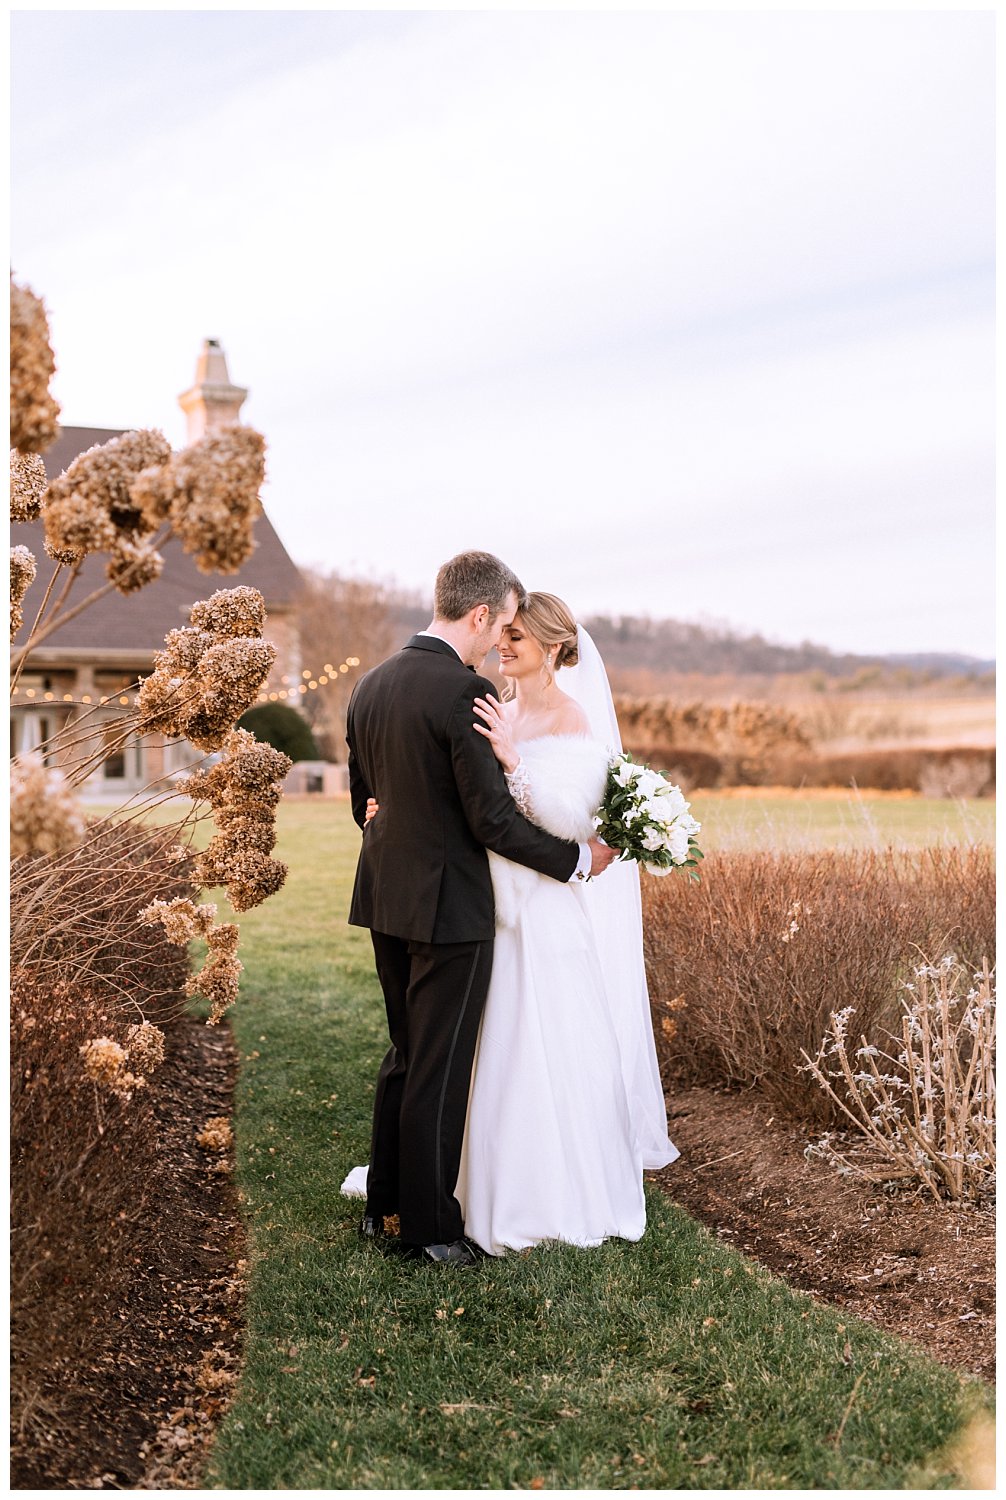 Newlywed sunset portraits at Early Mountain Vineyard in Charlottesville, Virginia